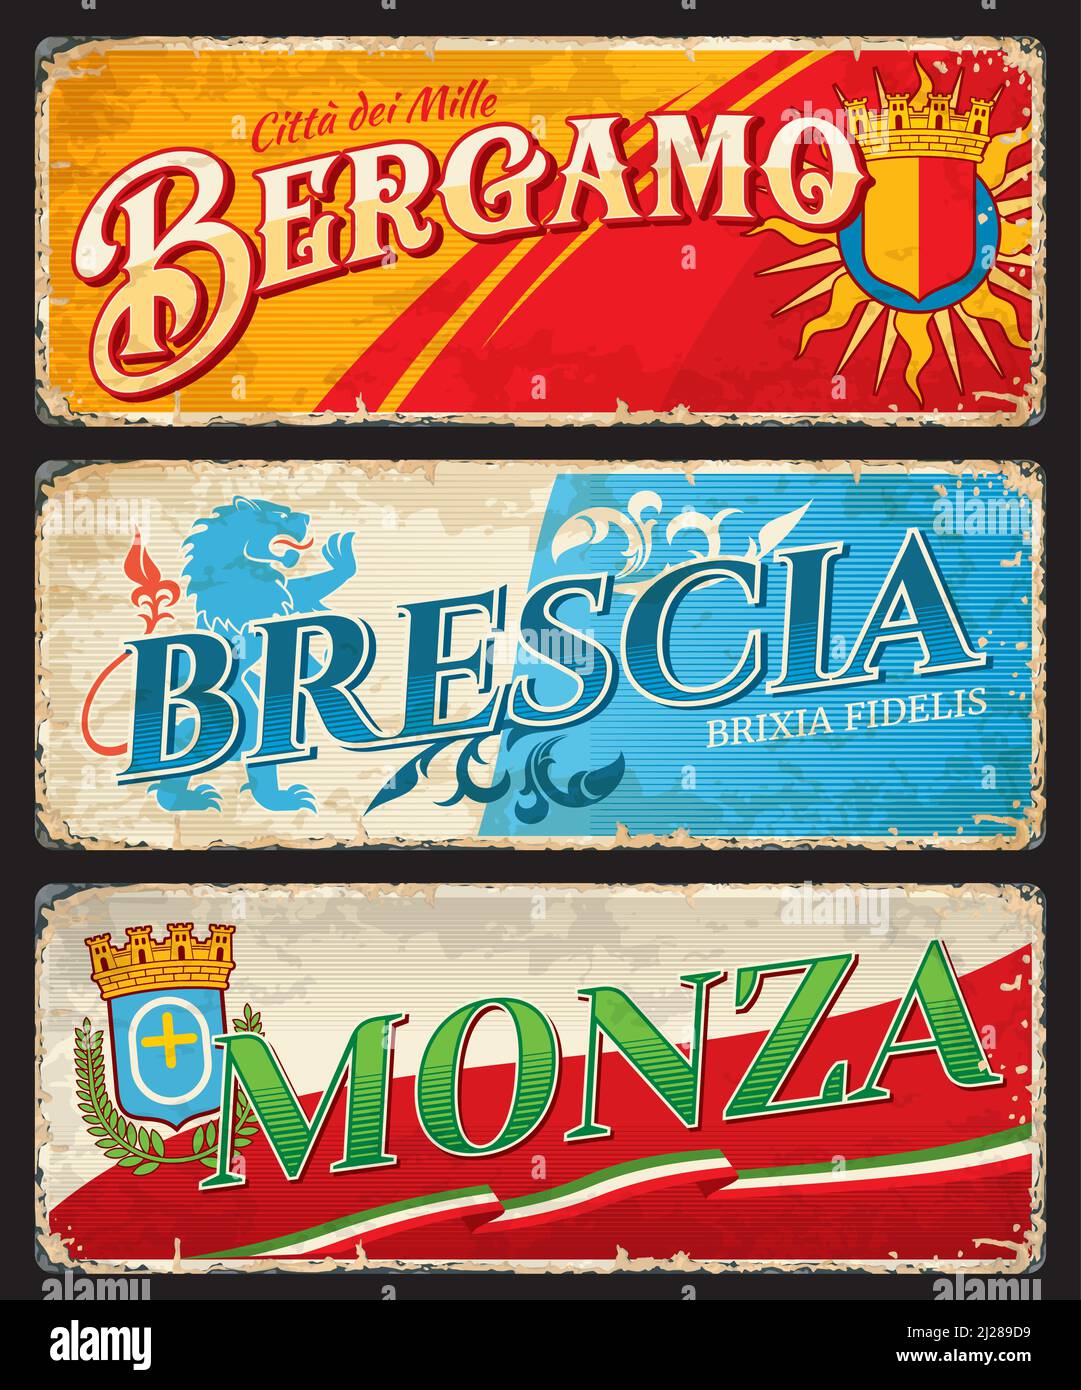 Bergamo, Brescia and Monza italian travel stickers and plates. Italy cities tin sings or grungy plates. European vacation journey or trip vector banner or postcards with city Coat of Arms and flags Stock Vector